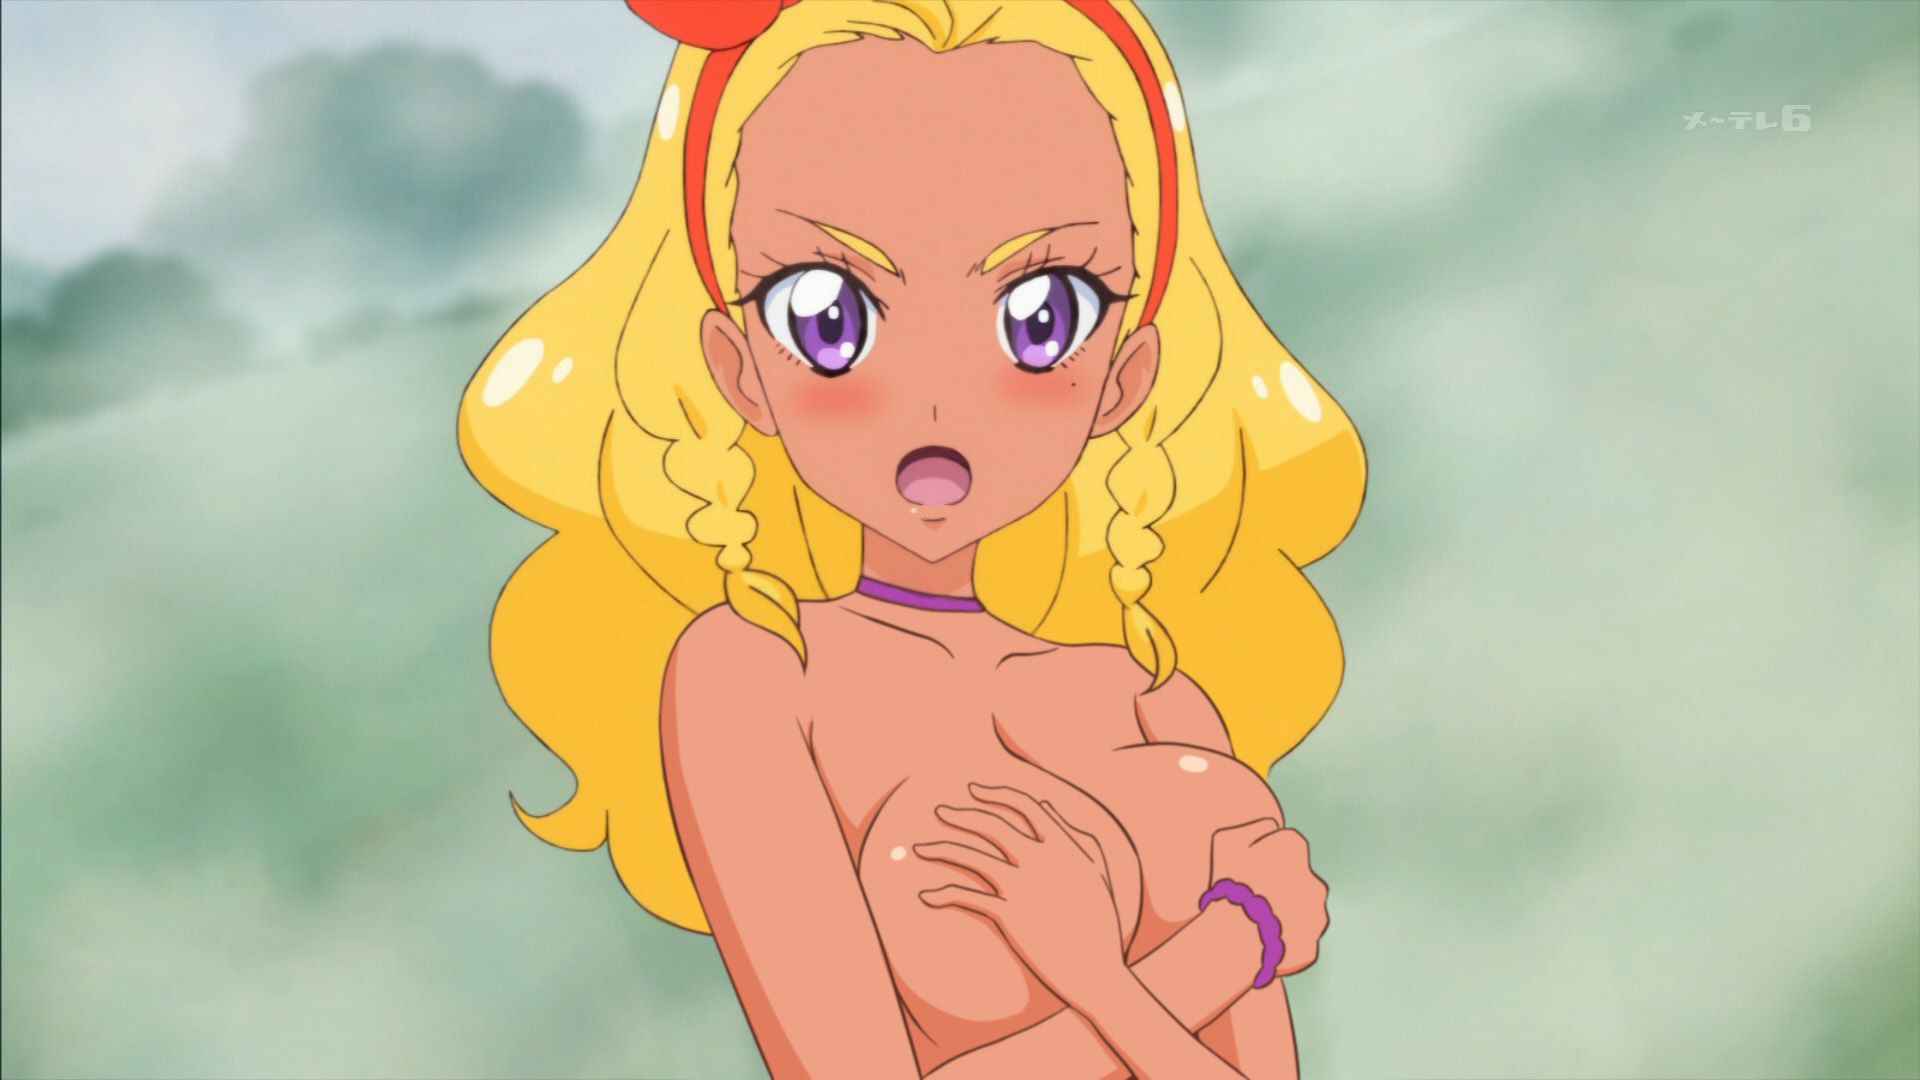 [Star Twinkle Pretty Cure] Stapuri's Image Erotic Image Part 13 21